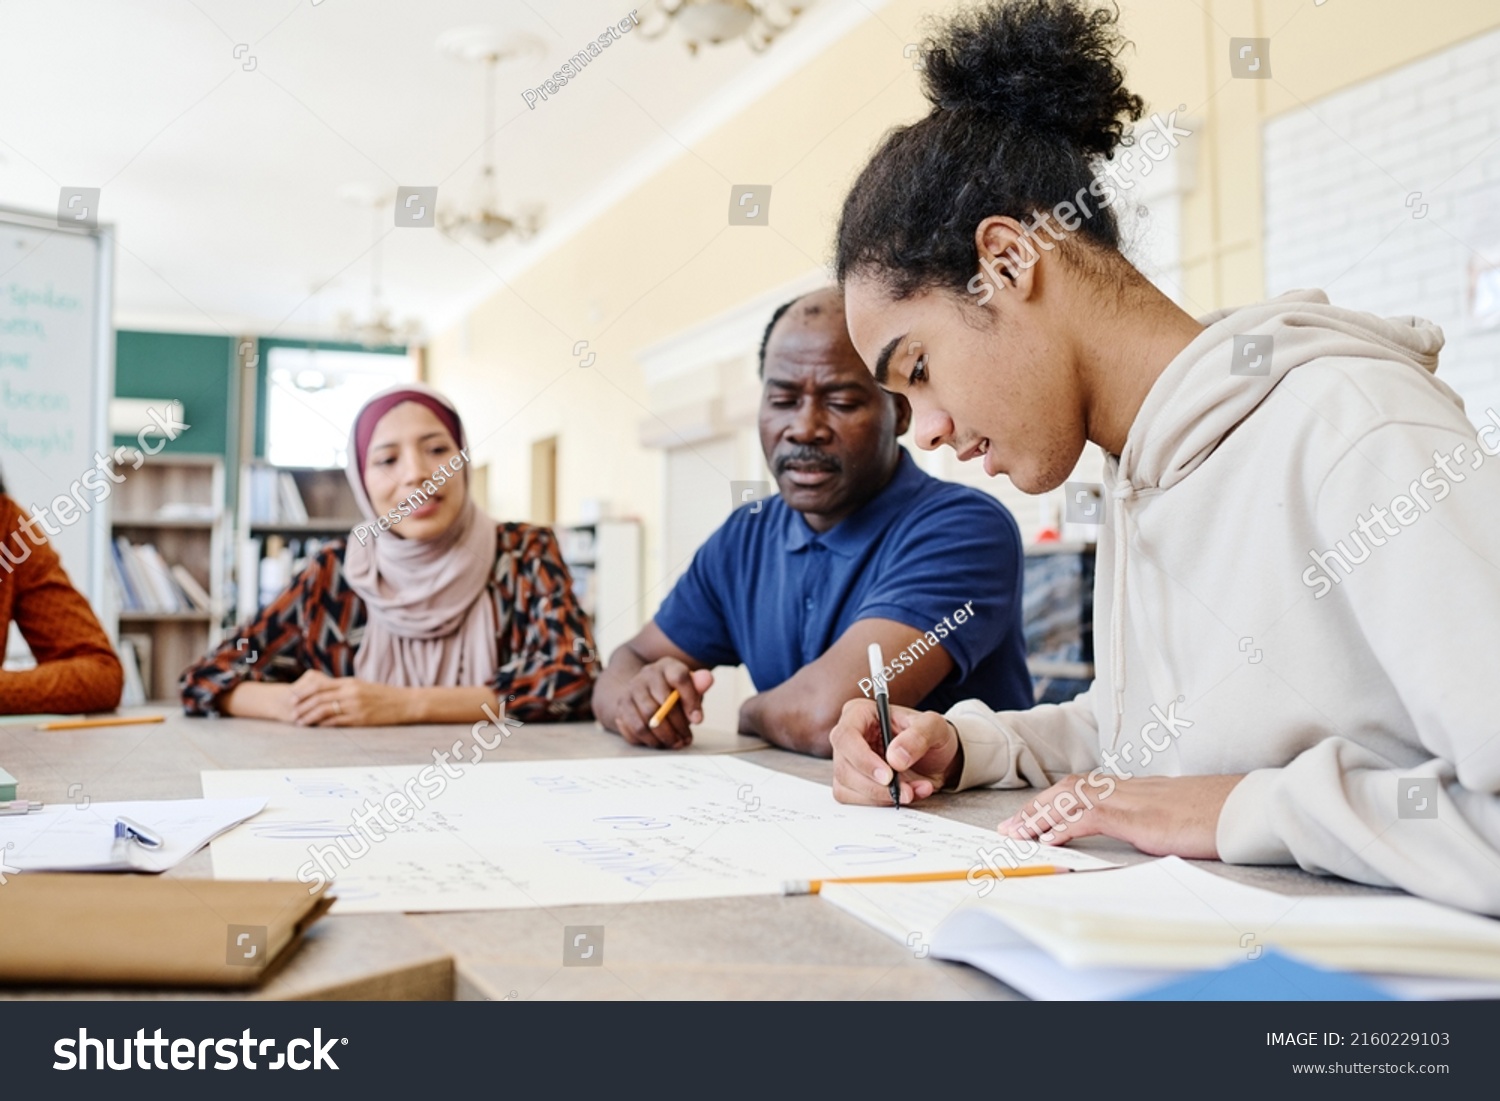 Young Black immigrant sitting at table writing something on handmade educational English language poster during lesson #2160229103